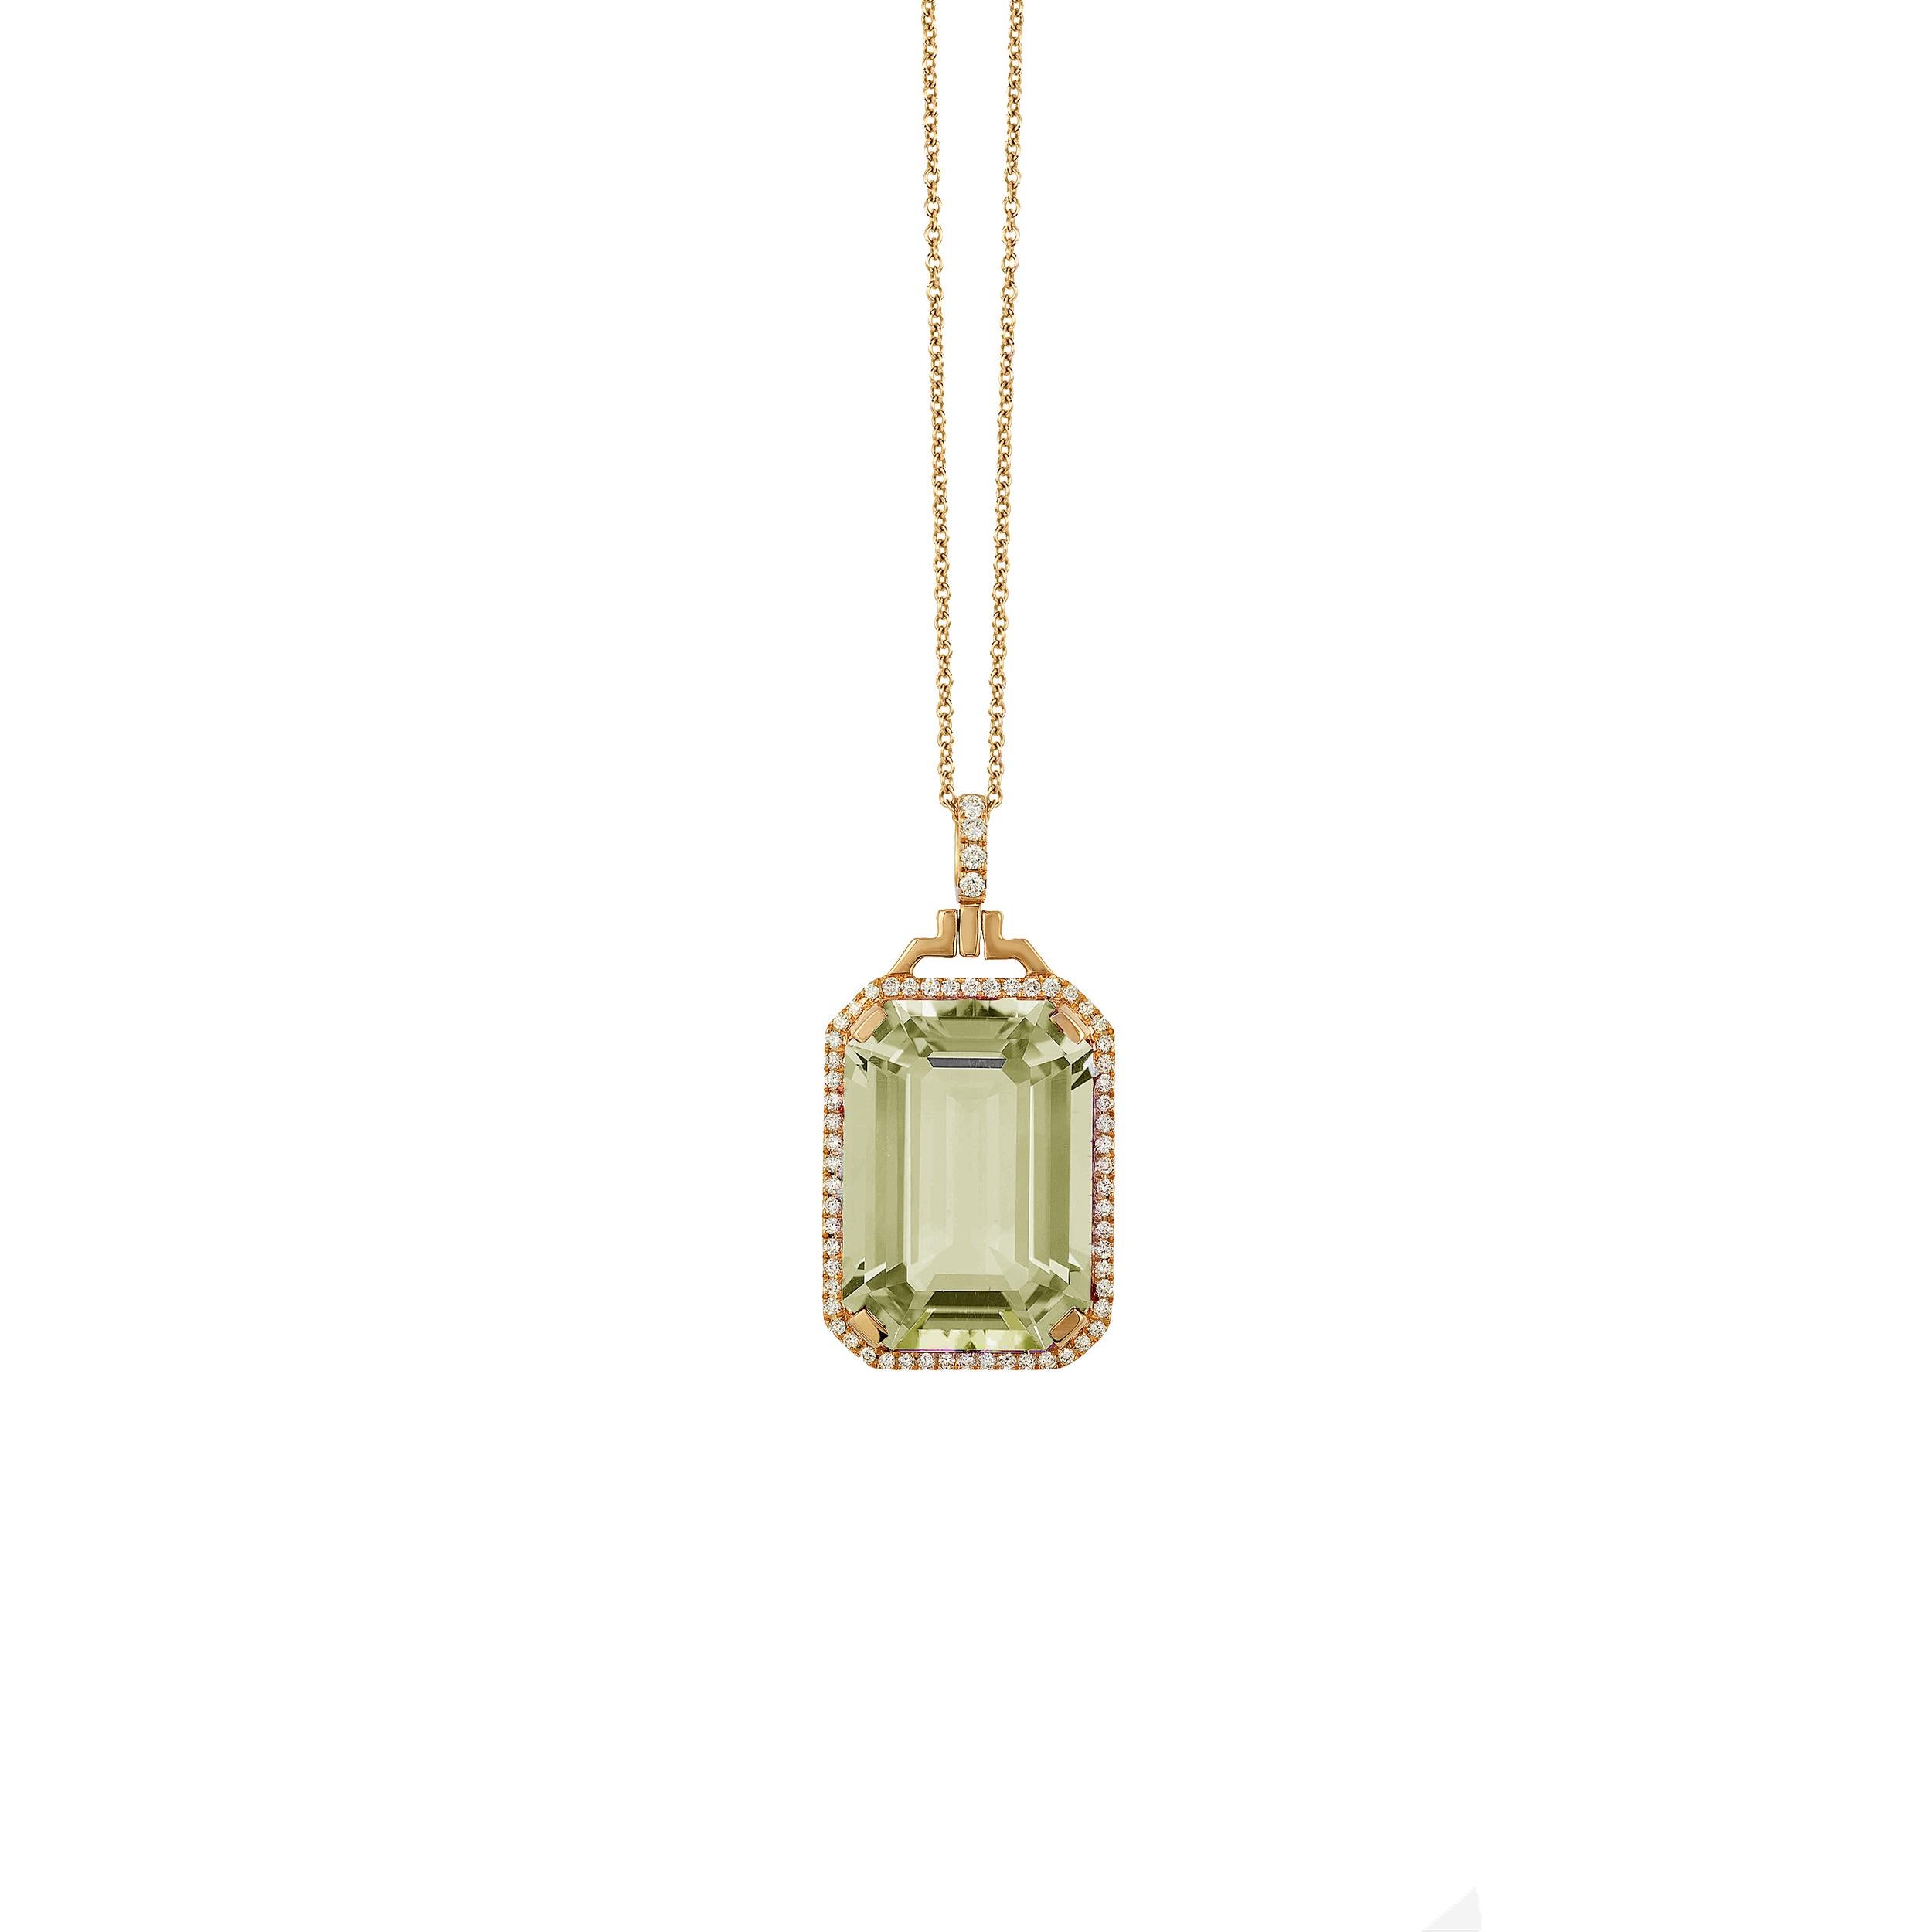 Prasiolite Emerald Cut Pendant with Diamonds in 18K Yellow Gold, from 'Gossip' Collection 
 
 on a 18'' Chain
 
 Stone Size: 14 x 20 mm 
 
 Gemstone Approx Wt: Prasiolite-19.35 Carats 
 
 Diamonds: G-H / VS, Approx Wt : 0.30 Carats